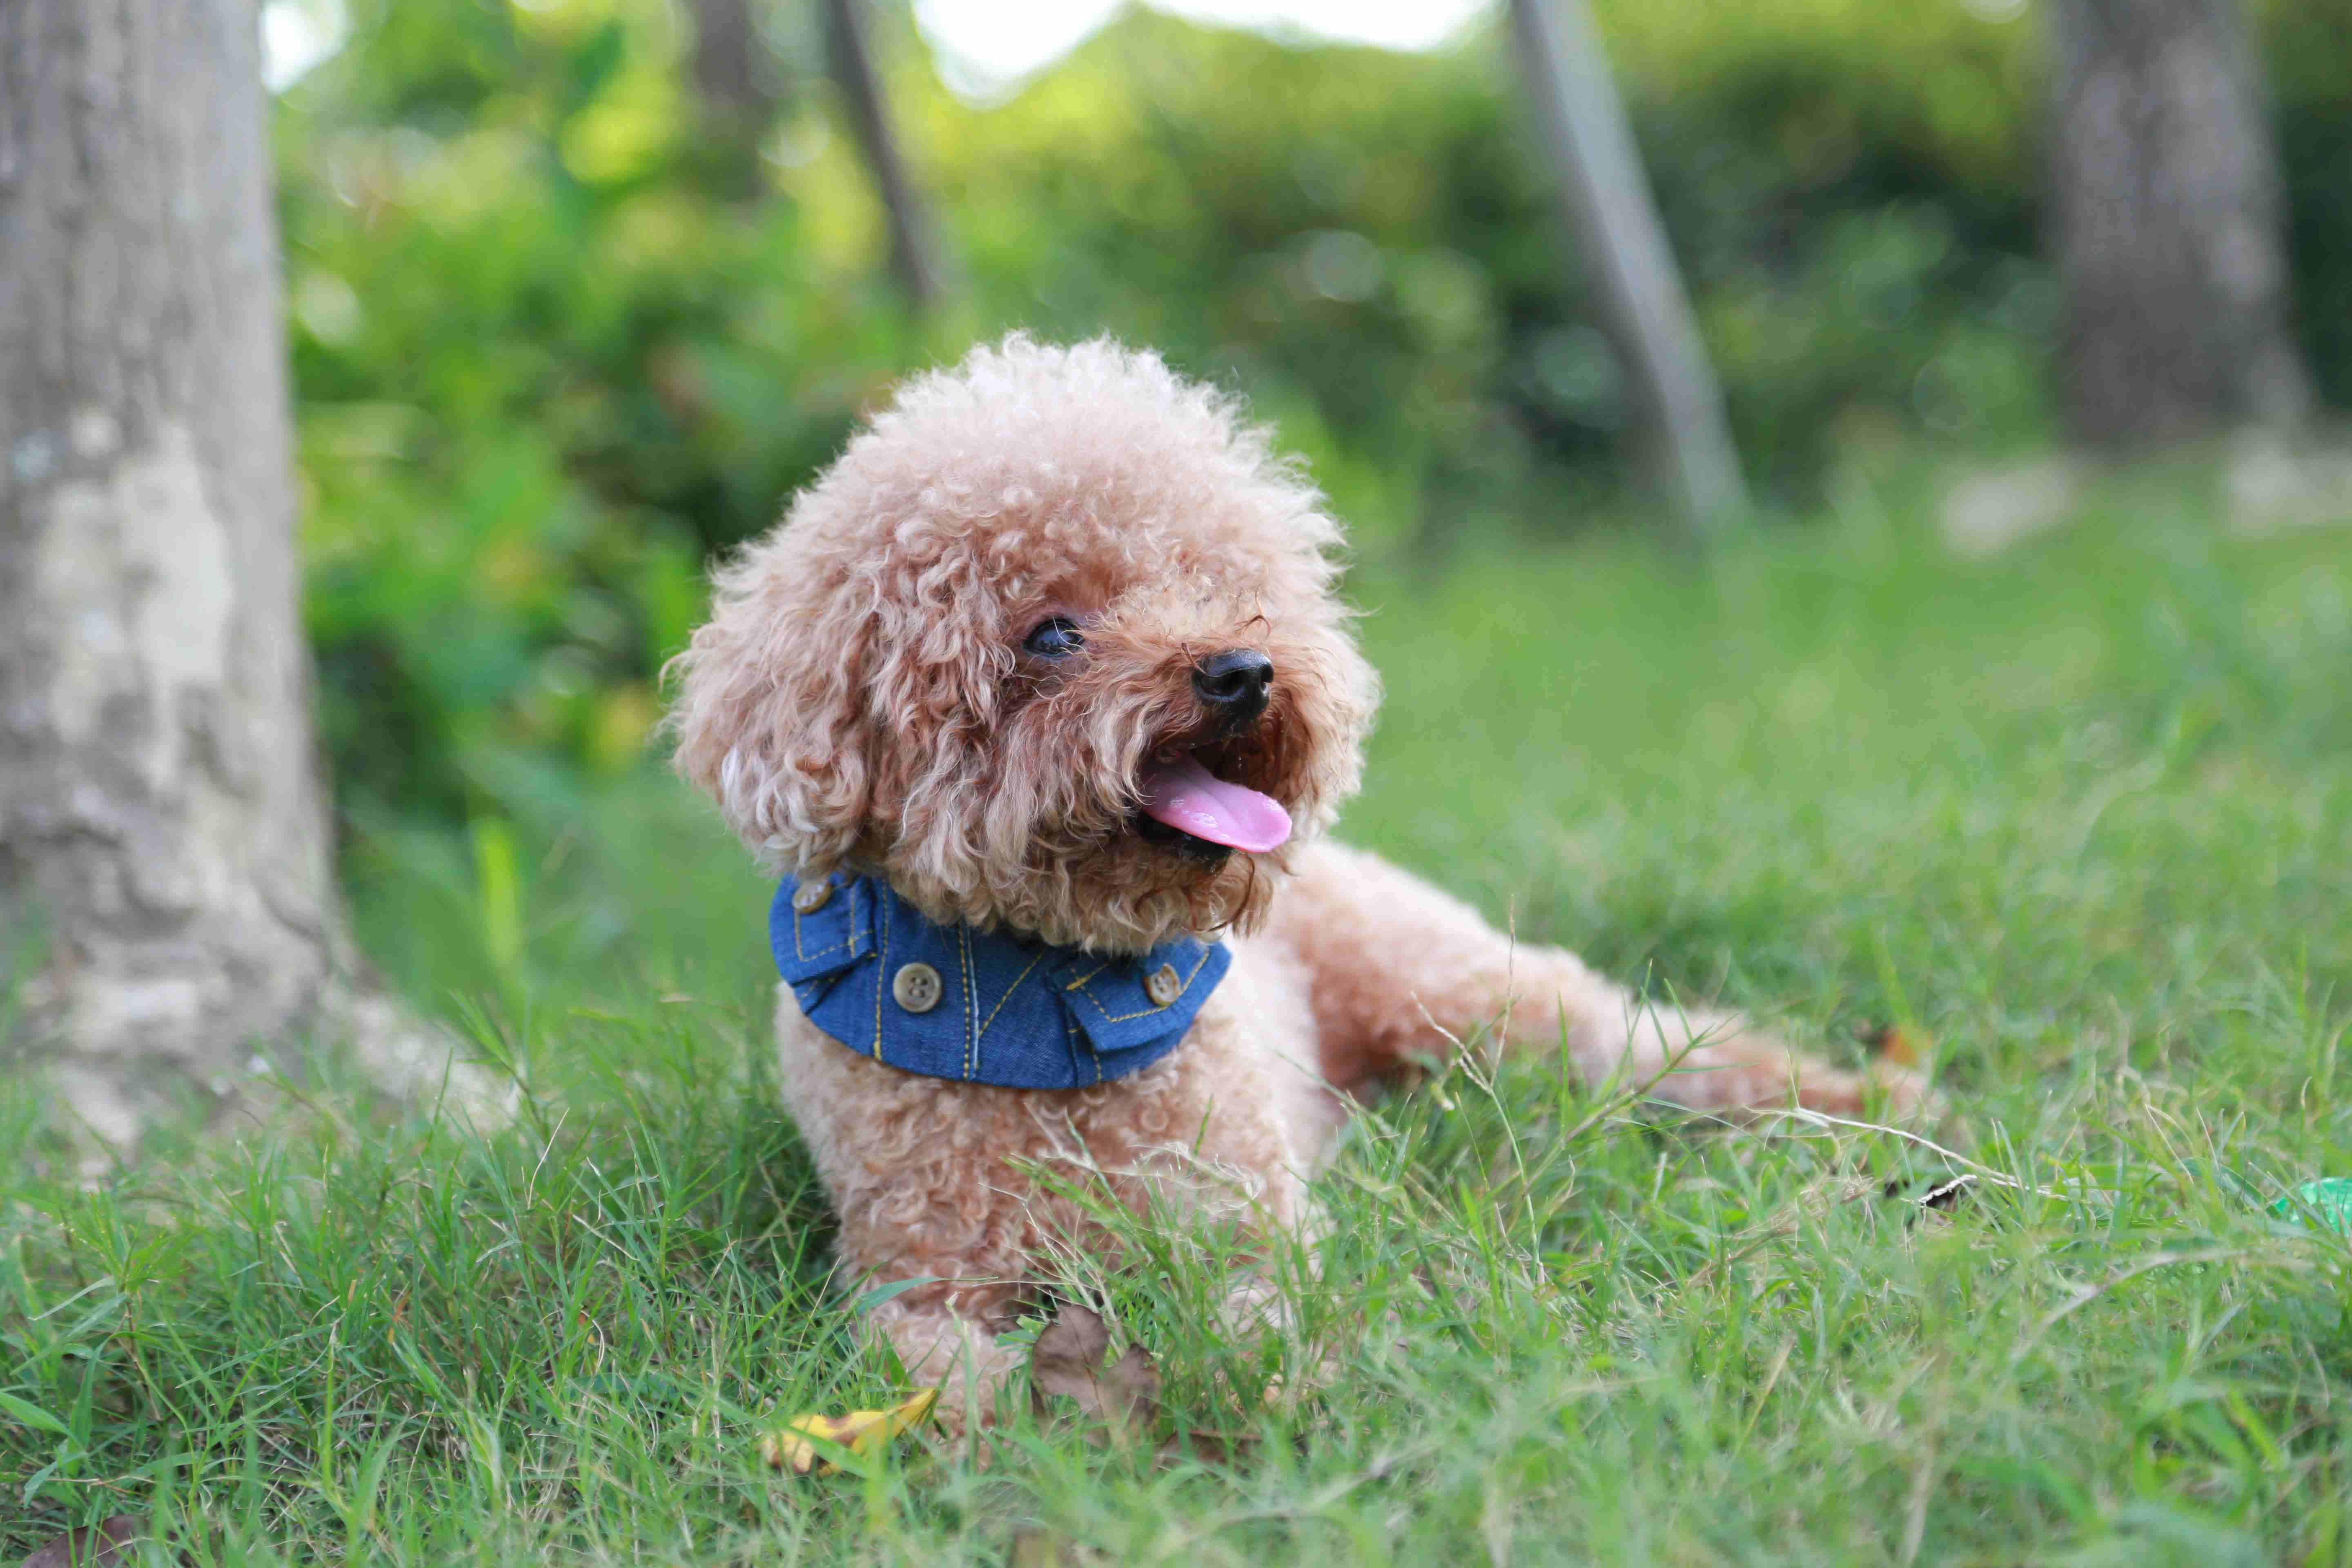 Do Poodles commonly suffer from gastrointestinal obstructions or blockages? How can these conditions be treated?